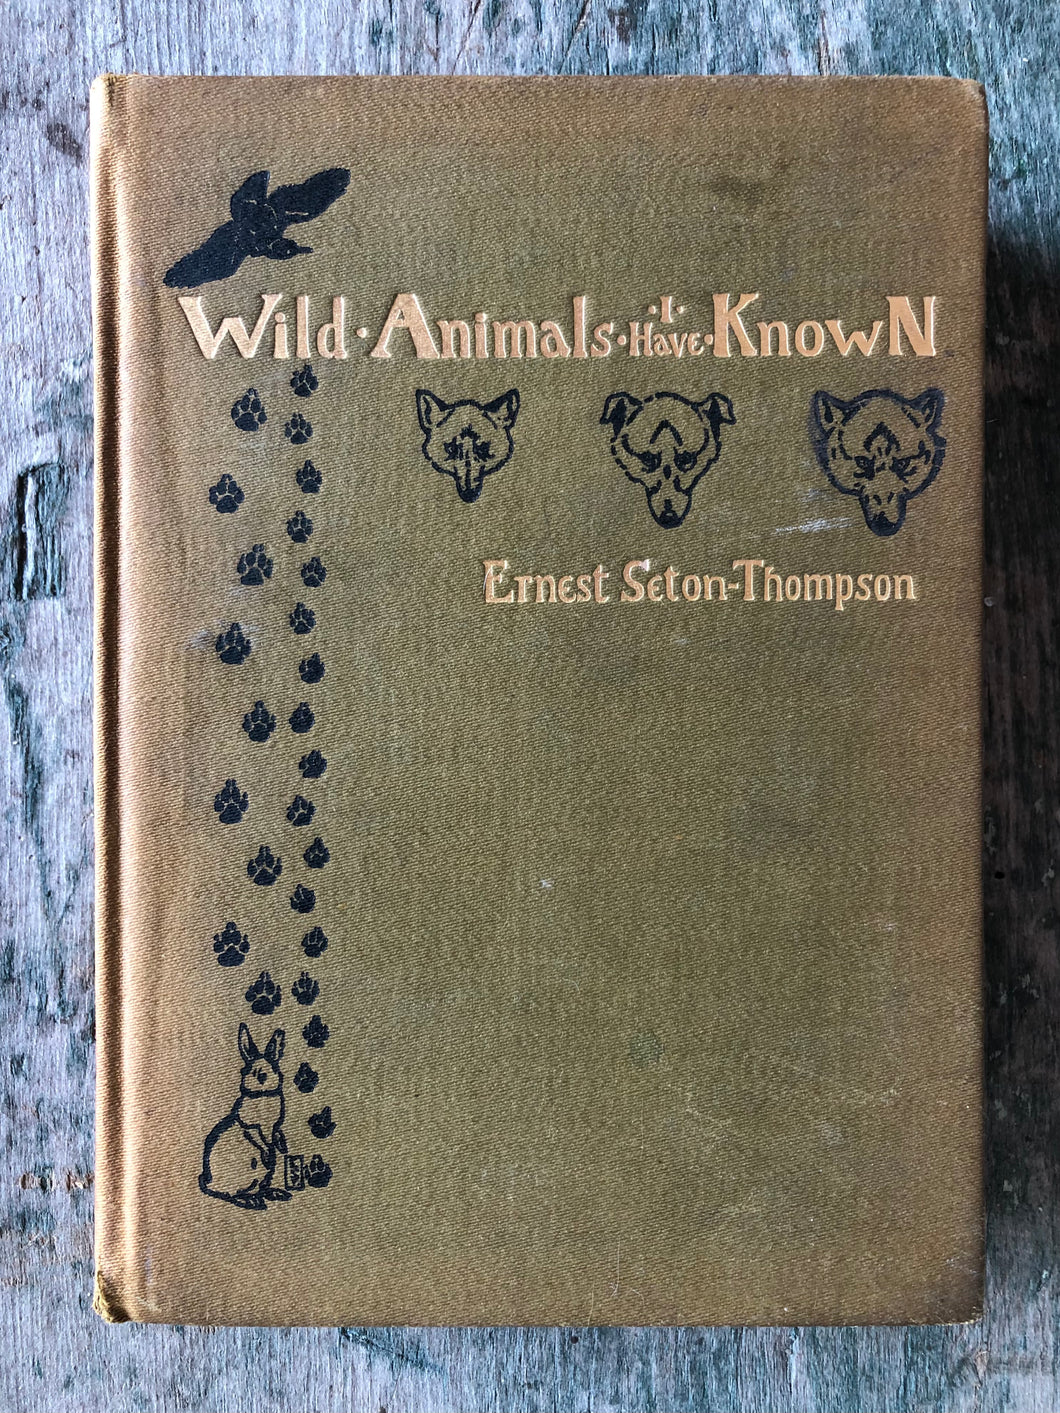 Wild Animals I Have Known and 200 Drawings by Ernest Seton-Thompson